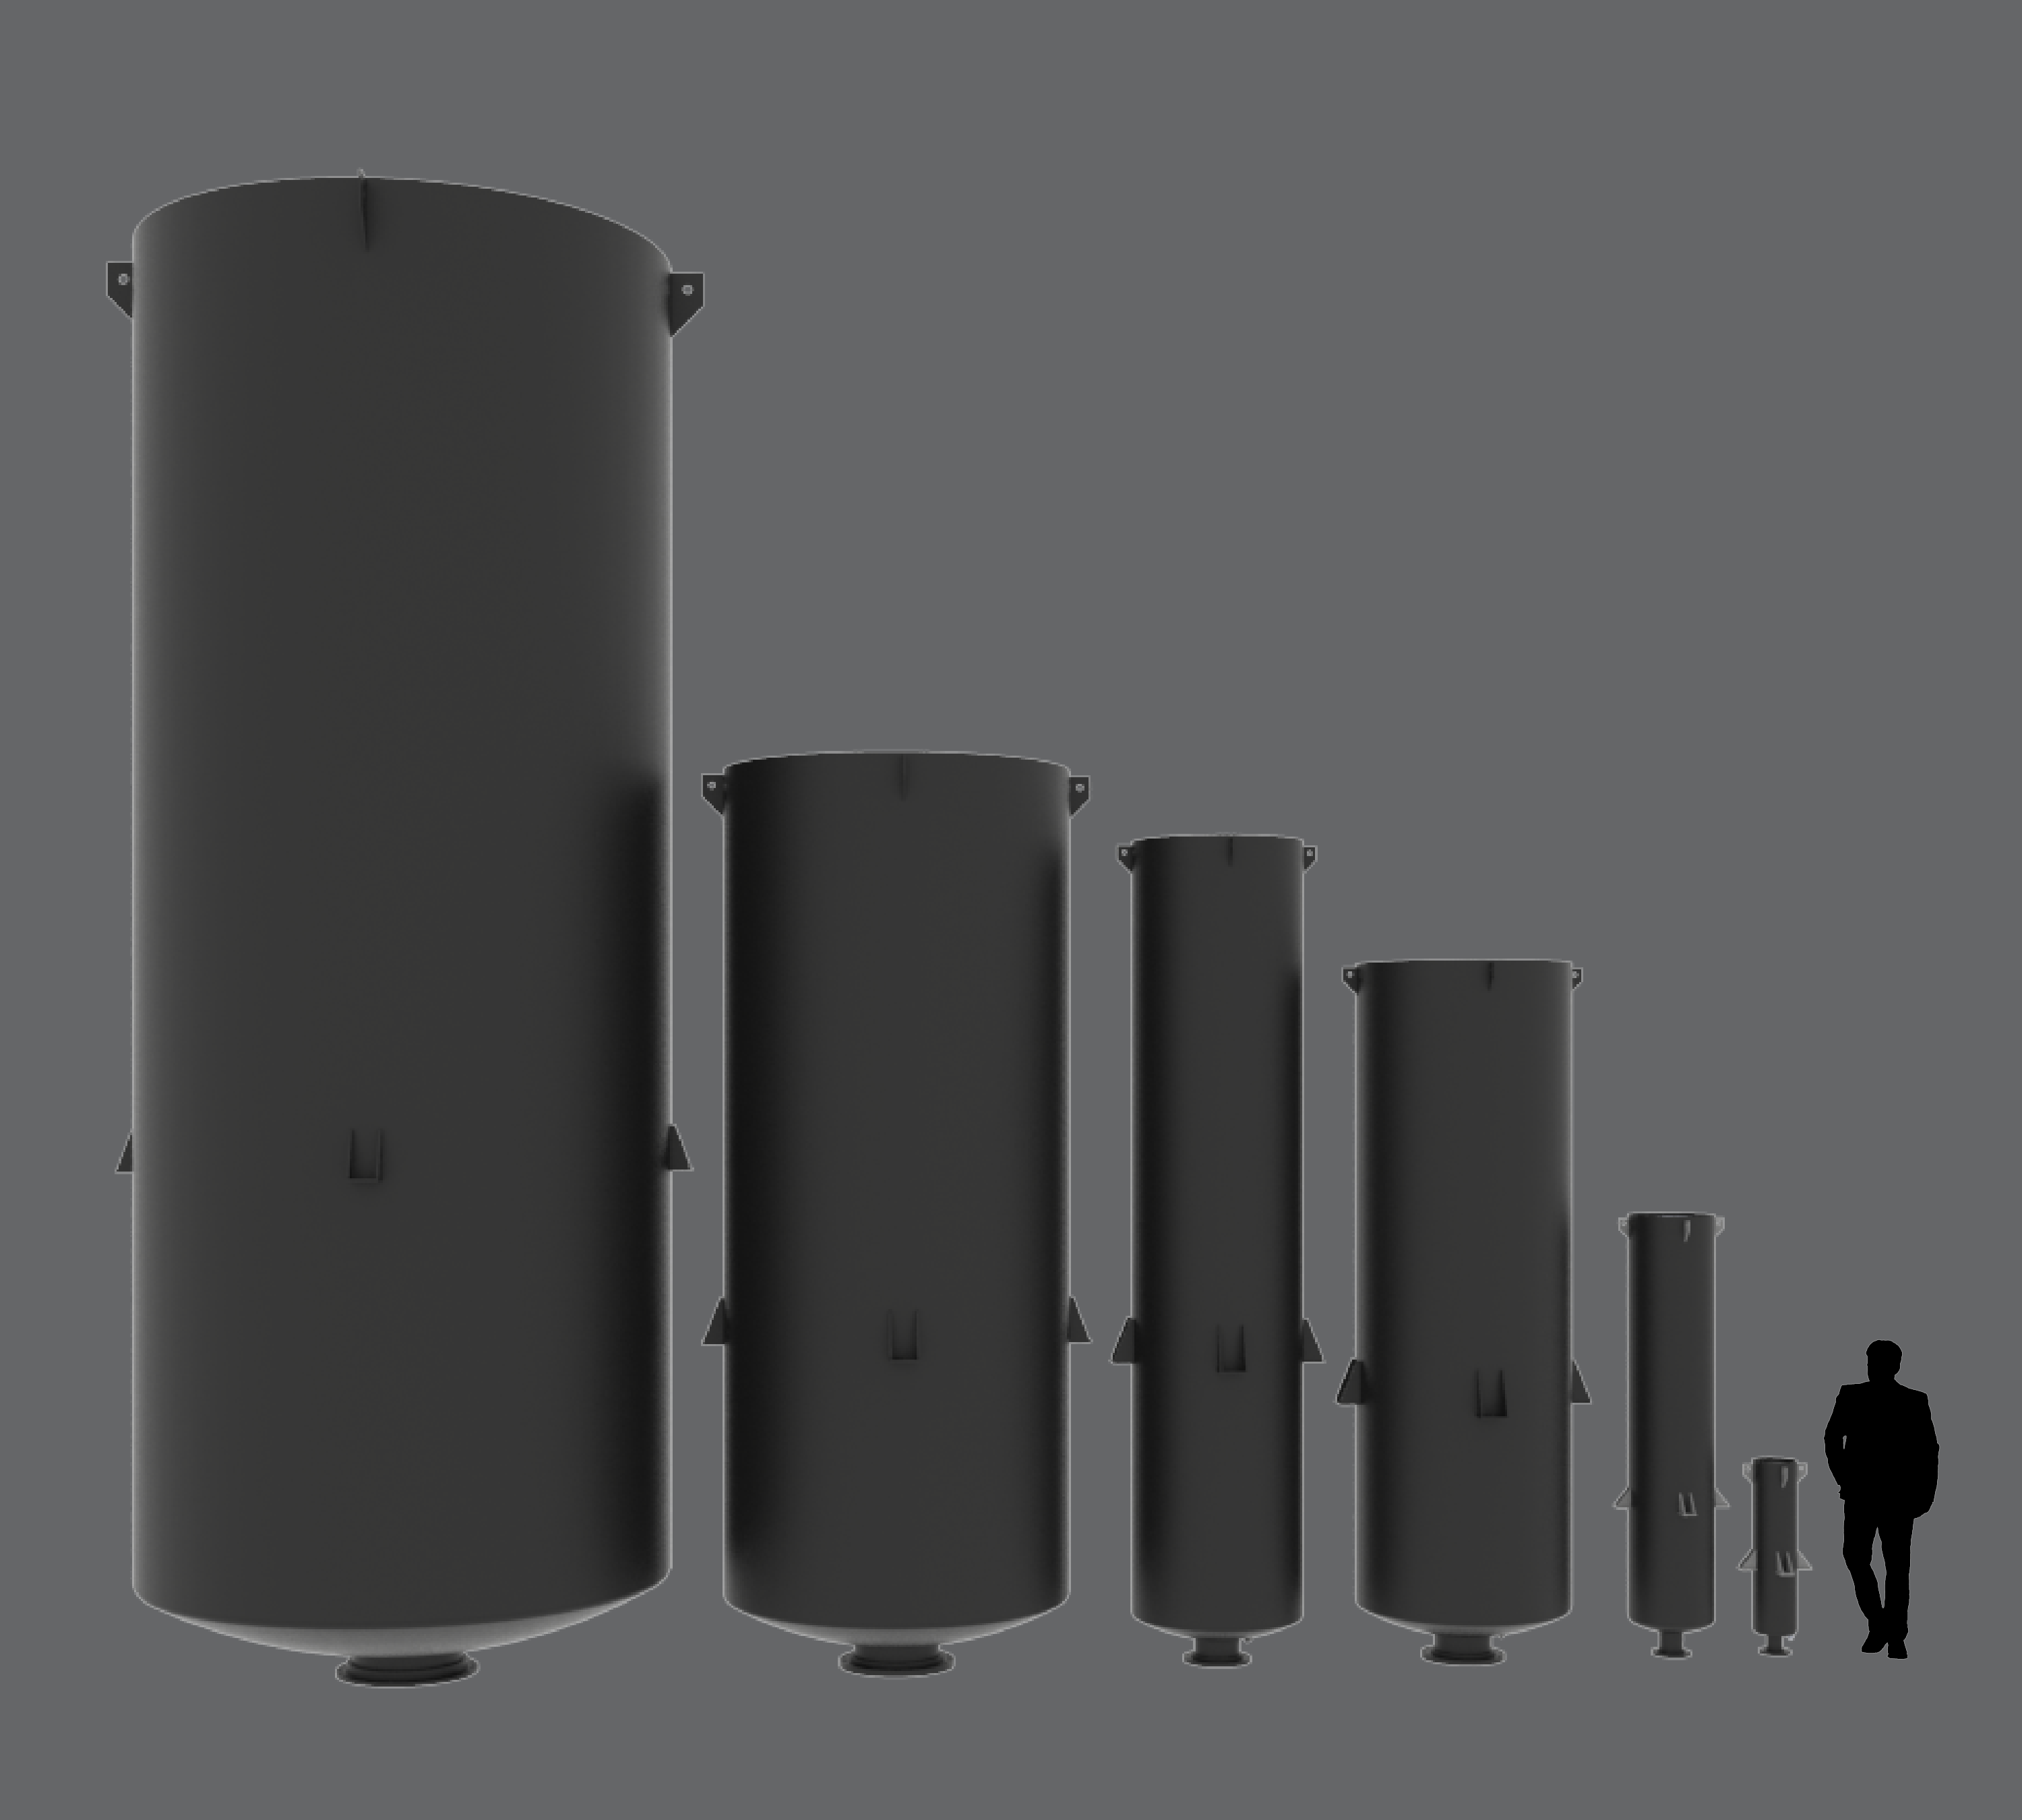 Legacy Silencer Size Comparison to Human